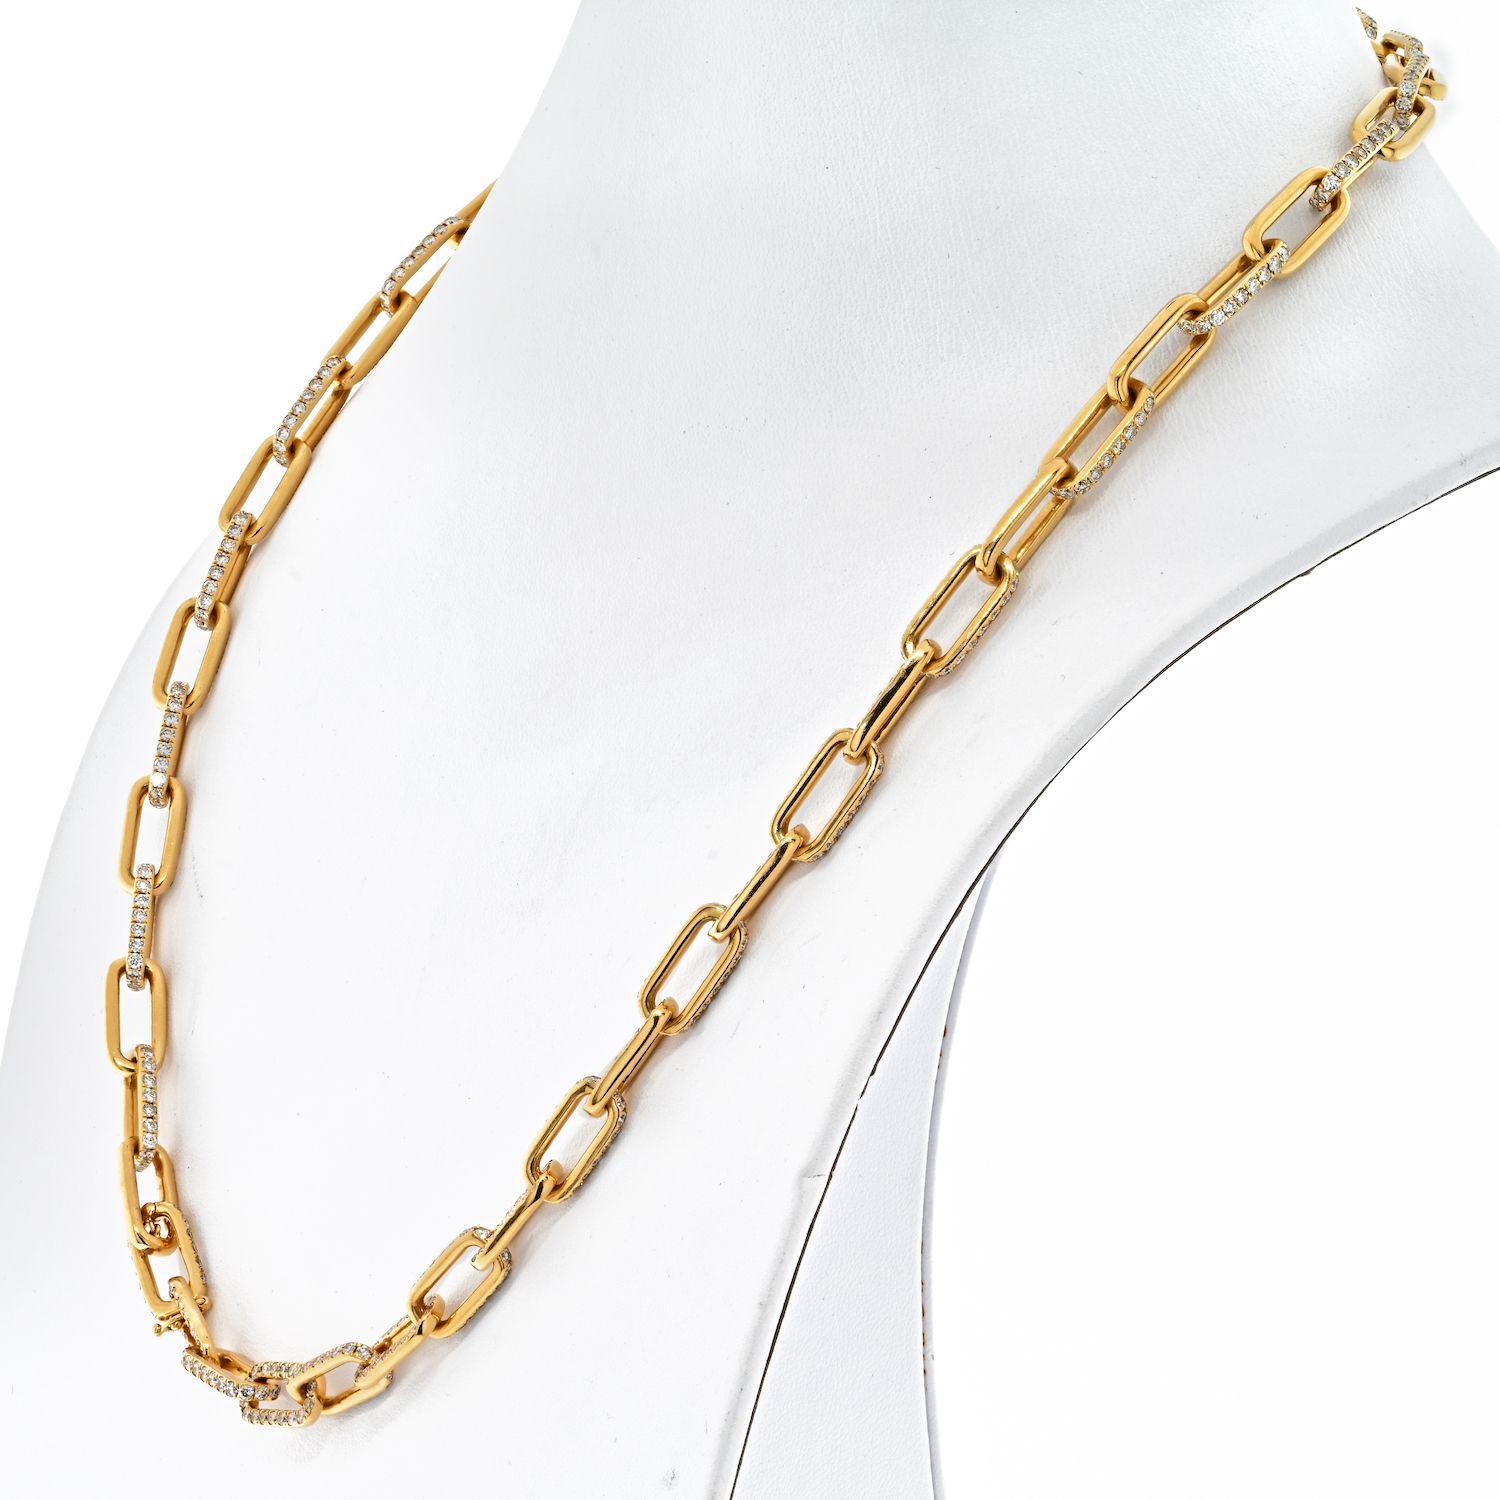 18K Yellow Gold 21 Carat Diamond Link Chain Necklace.
Crafted out of 18K rose gold, every paperclip link is accented with round-cut diamonds, total diamond weight is approximately 21 carats; length 22 inches; weight 60 g.  
Stamped 18K. 